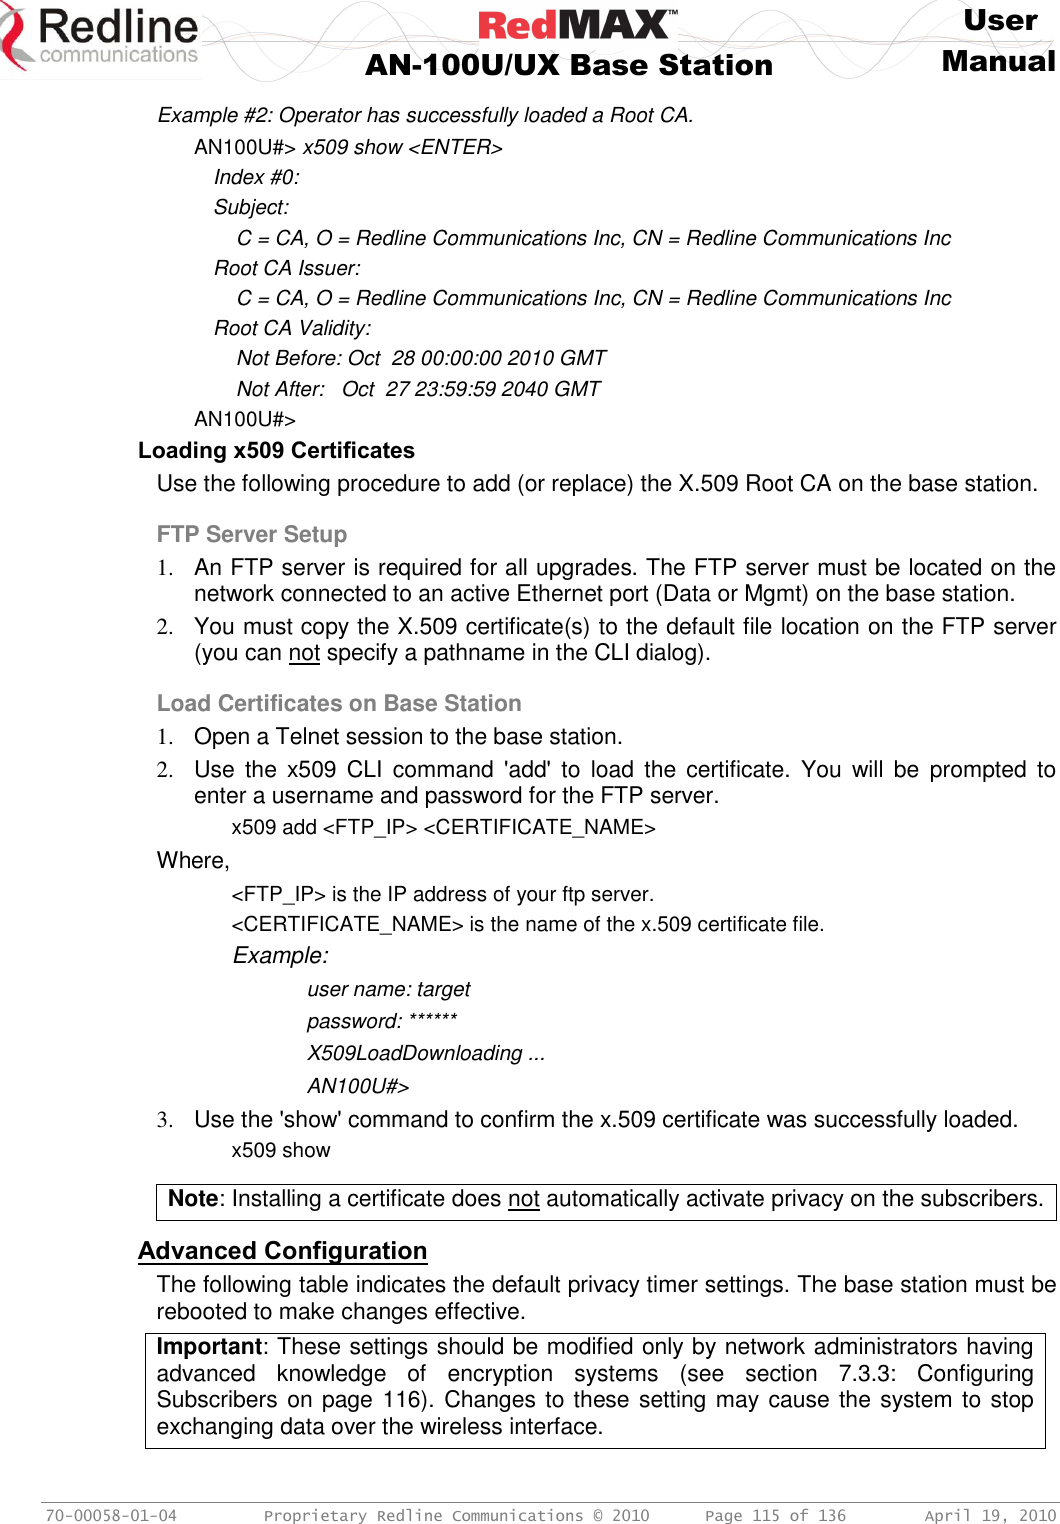     User  AN-100U/UX Base Station Manual   70-00058-01-04  Proprietary Redline Communications © 2010   Page 115 of 136  April 19, 2010 Example #2: Operator has successfully loaded a Root CA. AN100U#&gt; x509 show &lt;ENTER&gt; Index #0: Subject:     C = CA, O = Redline Communications Inc, CN = Redline Communications Inc Root CA Issuer:     C = CA, O = Redline Communications Inc, CN = Redline Communications Inc Root CA Validity:     Not Before: Oct  28 00:00:00 2010 GMT     Not After:   Oct  27 23:59:59 2040 GMT AN100U#&gt; Loading x509 Certificates Use the following procedure to add (or replace) the X.509 Root CA on the base station. FTP Server Setup 1.  An FTP server is required for all upgrades. The FTP server must be located on the network connected to an active Ethernet port (Data or Mgmt) on the base station. 2.  You must copy the X.509 certificate(s) to the default file location on the FTP server (you can not specify a pathname in the CLI dialog). Load Certificates on Base Station 1.  Open a Telnet session to the base station. 2.  Use  the  x509  CLI  command  &apos;add&apos;  to  load  the  certificate.  You  will  be  prompted  to enter a username and password for the FTP server.   x509 add &lt;FTP_IP&gt; &lt;CERTIFICATE_NAME&gt; Where, &lt;FTP_IP&gt; is the IP address of your ftp server. &lt;CERTIFICATE_NAME&gt; is the name of the x.509 certificate file.   Example:     user name: target     password: ******     X509LoadDownloading ...     AN100U#&gt; 3.  Use the &apos;show&apos; command to confirm the x.509 certificate was successfully loaded.    x509 show  Note: Installing a certificate does not automatically activate privacy on the subscribers.  Advanced Configuration The following table indicates the default privacy timer settings. The base station must be rebooted to make changes effective. Important: These settings should be modified only by network administrators having advanced  knowledge  of  encryption  systems  (see  section  7.3.3:  Configuring Subscribers on page 116). Changes to these setting may cause the system to stop exchanging data over the wireless interface.   